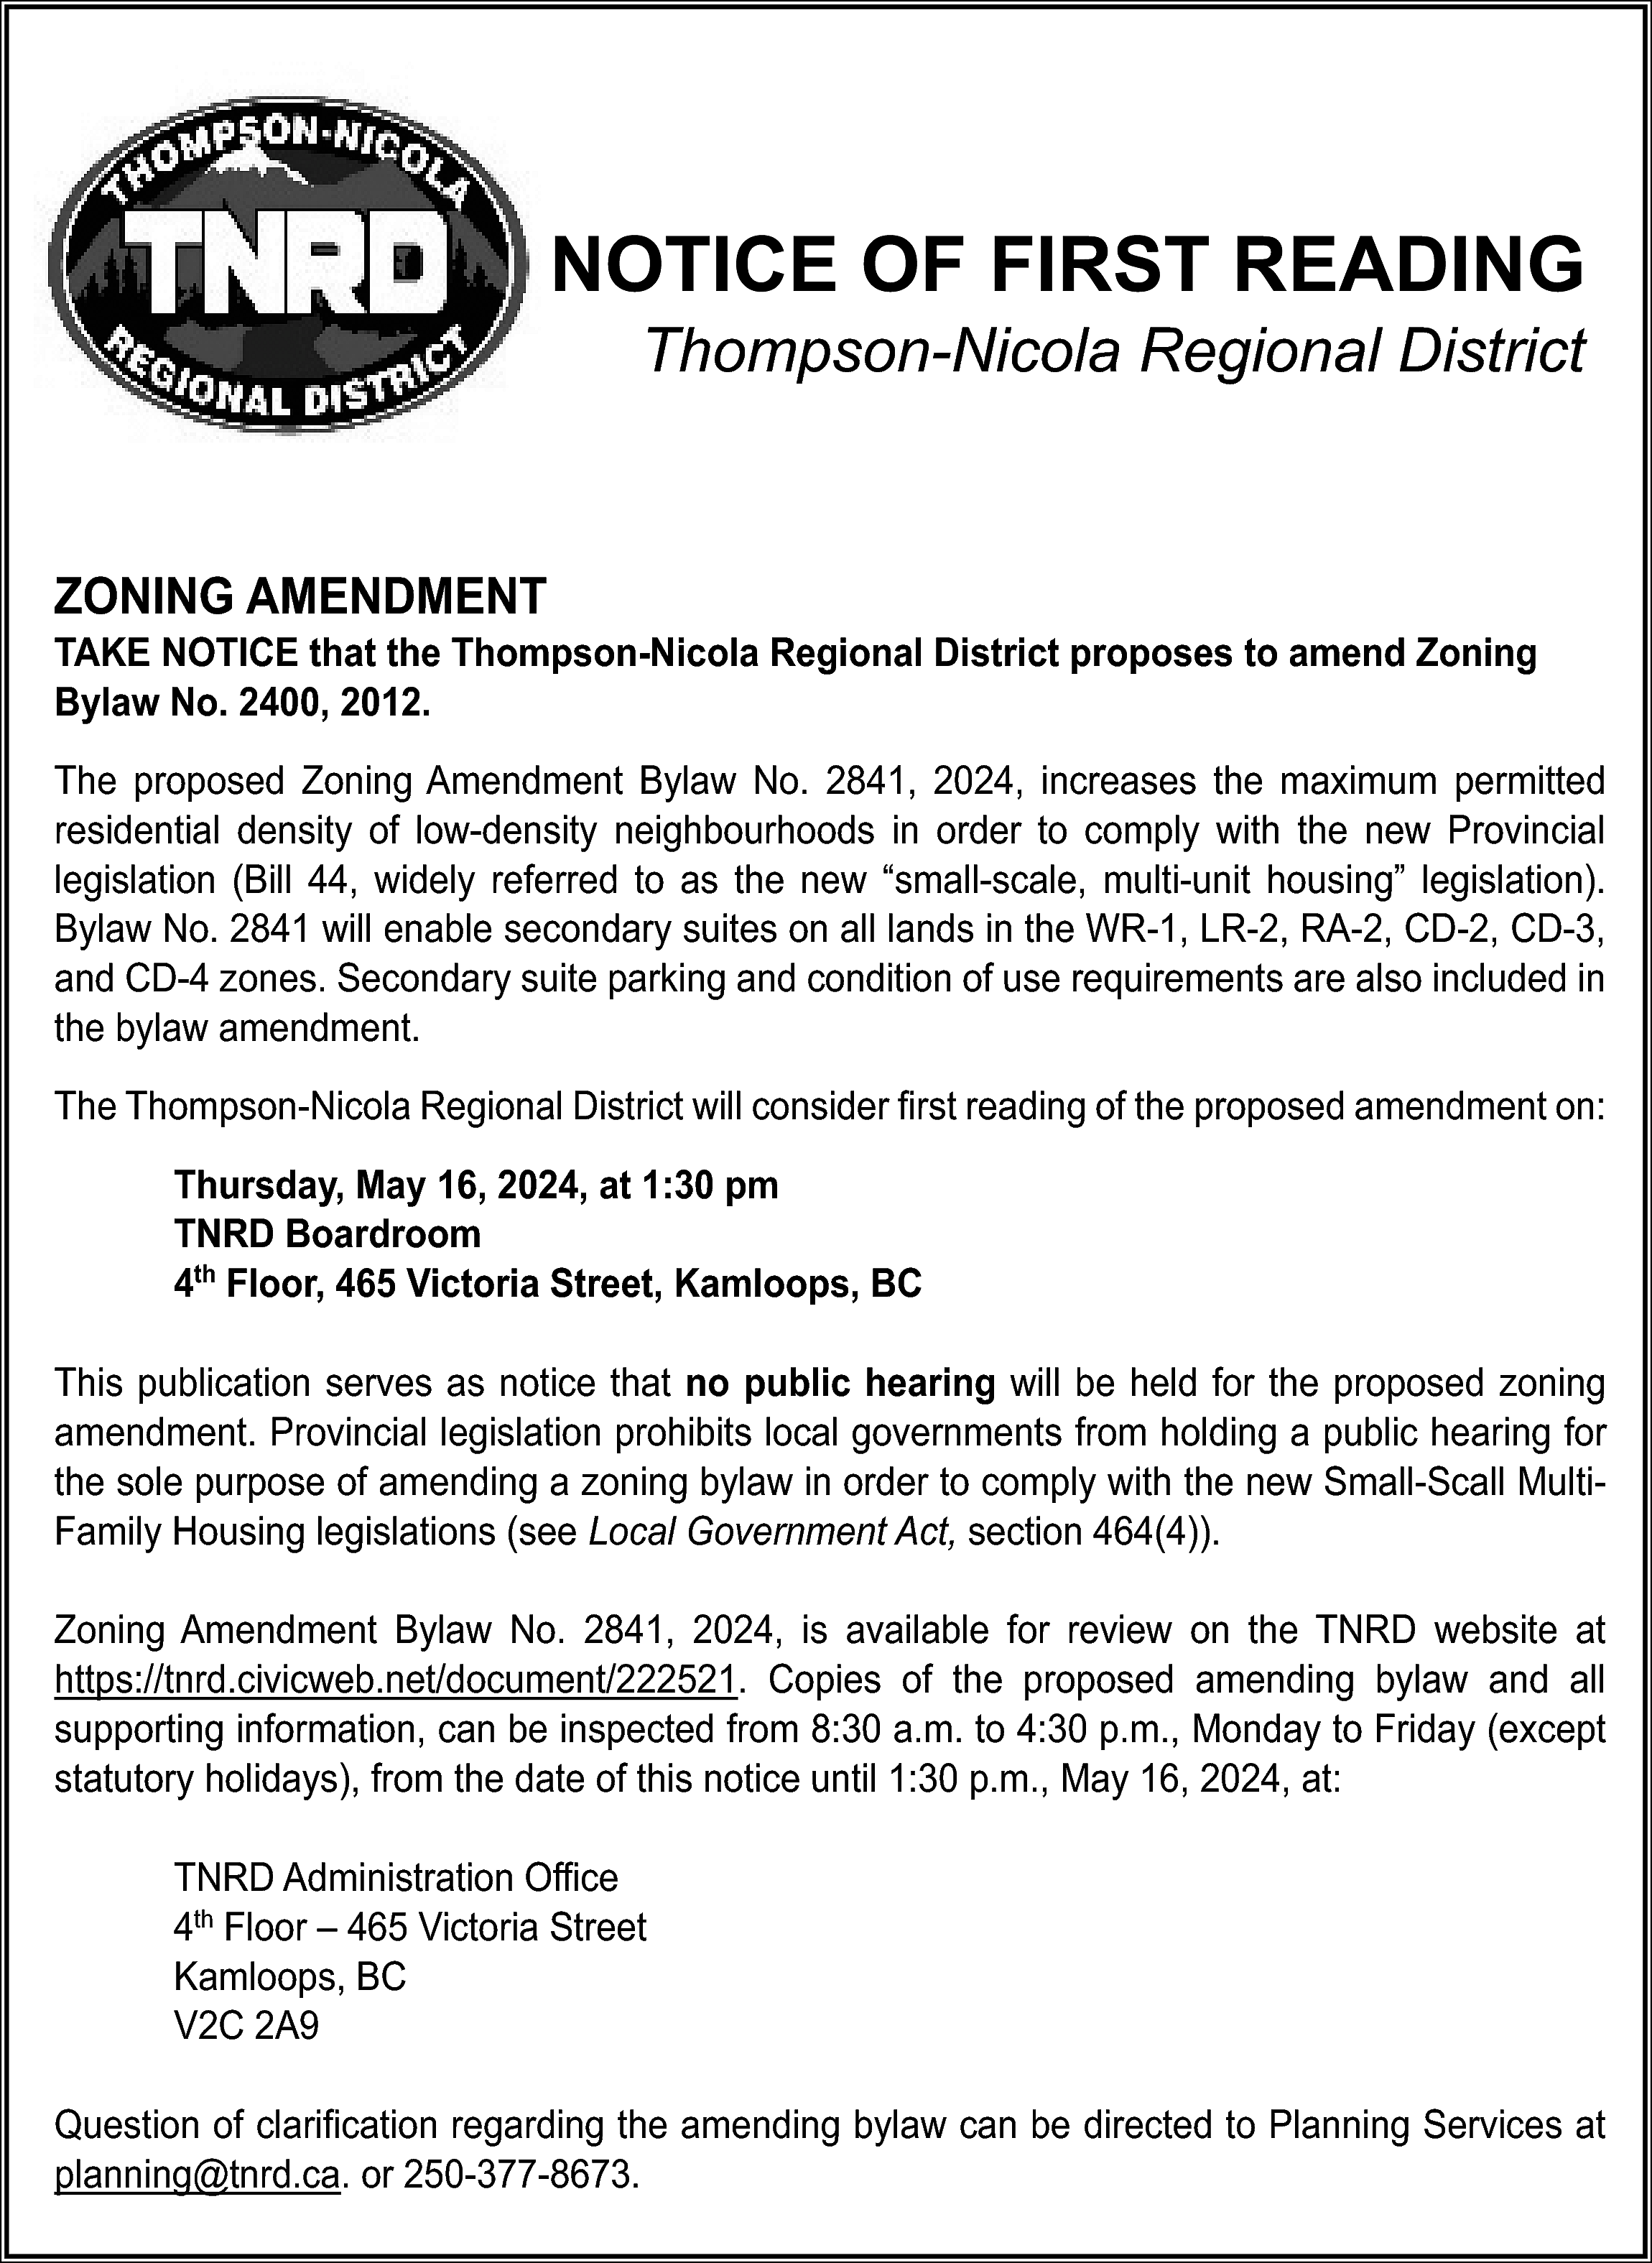 NOTICE OF FIRST READING <br>Thompson-Nicola  NOTICE OF FIRST READING  Thompson-Nicola Regional District    ZONING AMENDMENT    TAKE NOTICE that the Thompson-Nicola Regional District proposes to amend Zoning  Bylaw No. 2400, 2012.  The proposed Zoning Amendment Bylaw No. 2841, 2024, increases the maximum permitted  residential density of low-density neighbourhoods in order to comply with the new Provincial  legislation (Bill 44, widely referred to as the new “small-scale, multi-unit housing” legislation).  Bylaw No. 2841 will enable secondary suites on all lands in the WR-1, LR-2, RA-2, CD-2, CD-3,  and CD-4 zones. Secondary suite parking and condition of use requirements are also included in  the bylaw amendment.  The Thompson-Nicola Regional District will consider first reading of the proposed amendment on:  Thursday, May 16, 2024, at 1:30 pm  TNRD Boardroom  4th Floor, 465 Victoria Street, Kamloops, BC  This publication serves as notice that no public hearing will be held for the proposed zoning  amendment. Provincial legislation prohibits local governments from holding a public hearing for  the sole purpose of amending a zoning bylaw in order to comply with the new Small-Scall MultiFamily Housing legislations (see Local Government Act, section 464(4)).  Zoning Amendment Bylaw No. 2841, 2024, is available for review on the TNRD website at  https://tnrd.civicweb.net/document/222521. Copies of the proposed amending bylaw and all  supporting information, can be inspected from 8:30 a.m. to 4:30 p.m., Monday to Friday (except  statutory holidays), from the date of this notice until 1:30 p.m., May 16, 2024, at:  TNRD Administration Office  4th Floor – 465 Victoria Street  Kamloops, BC  V2C 2A9  Question of clarification regarding the amending bylaw can be directed to Planning Services at  planning@tnrd.ca. or 250-377-8673.    